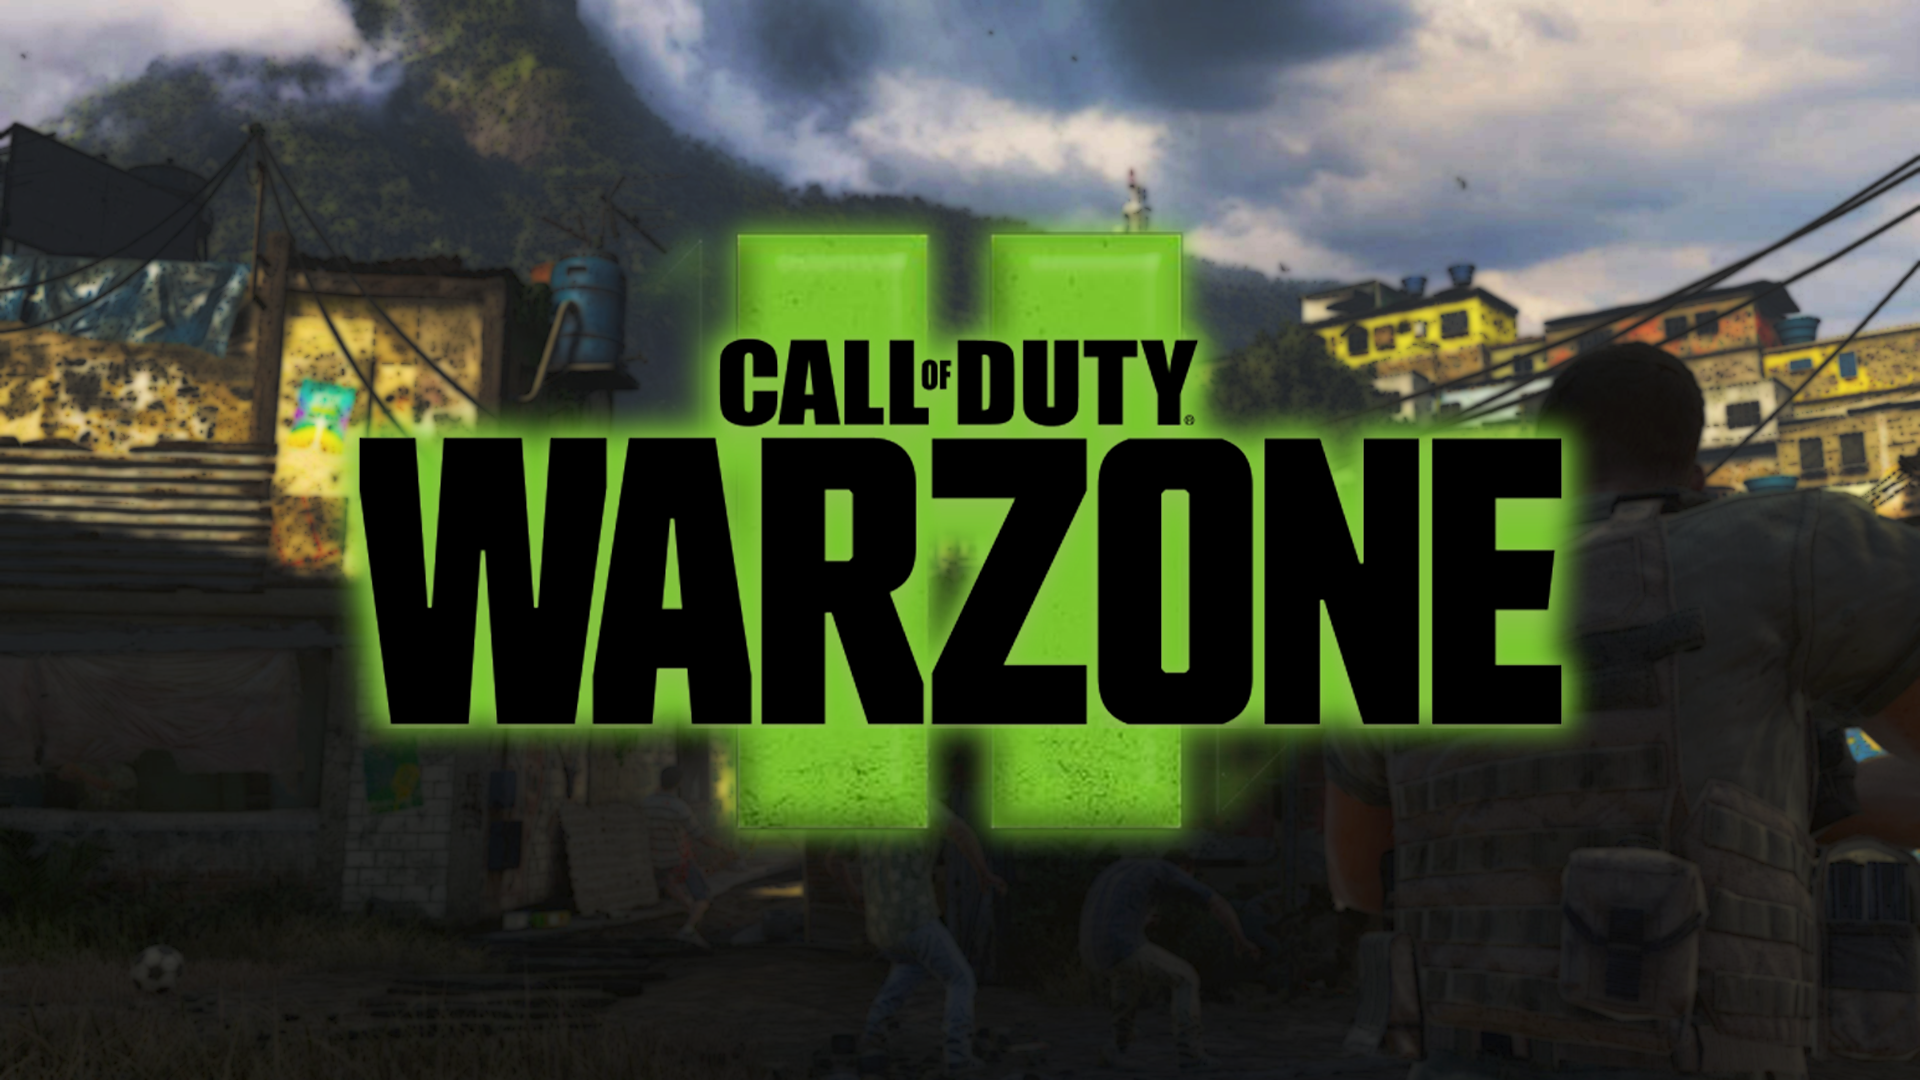 Warzone 2 release date, leaks, trailers, and more